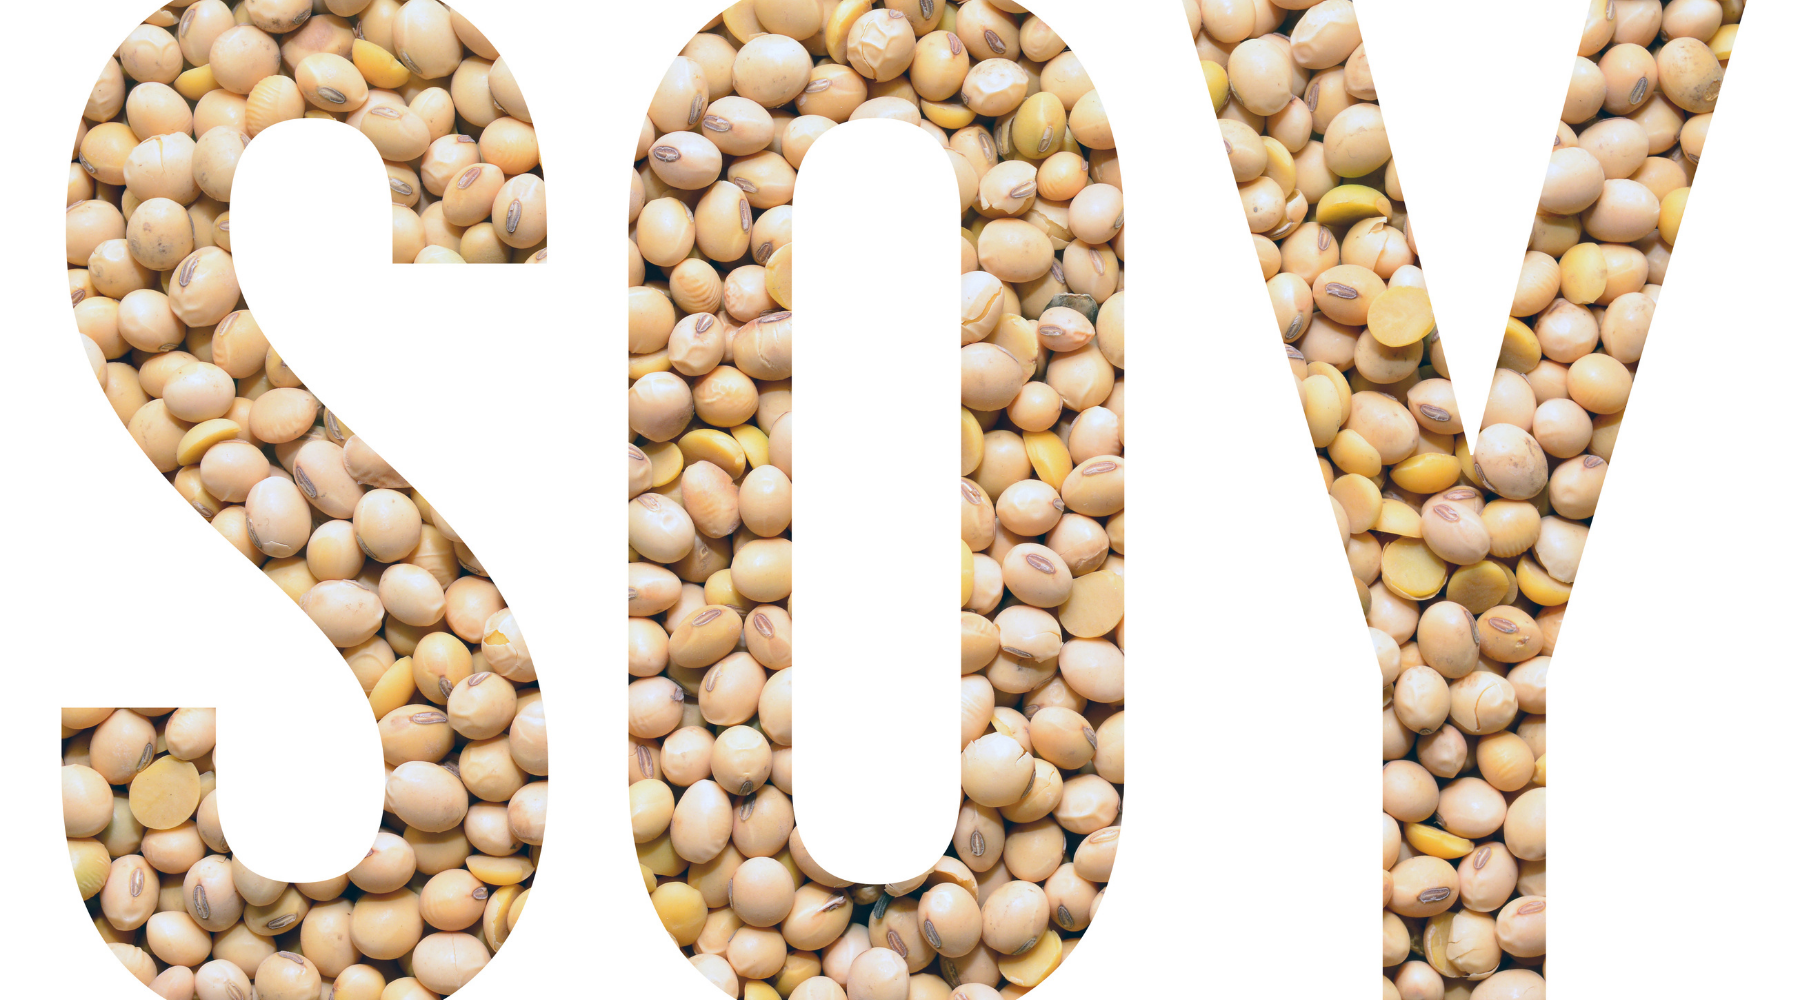 Are Soy Foods Healthy? Let's Discover The Truth!